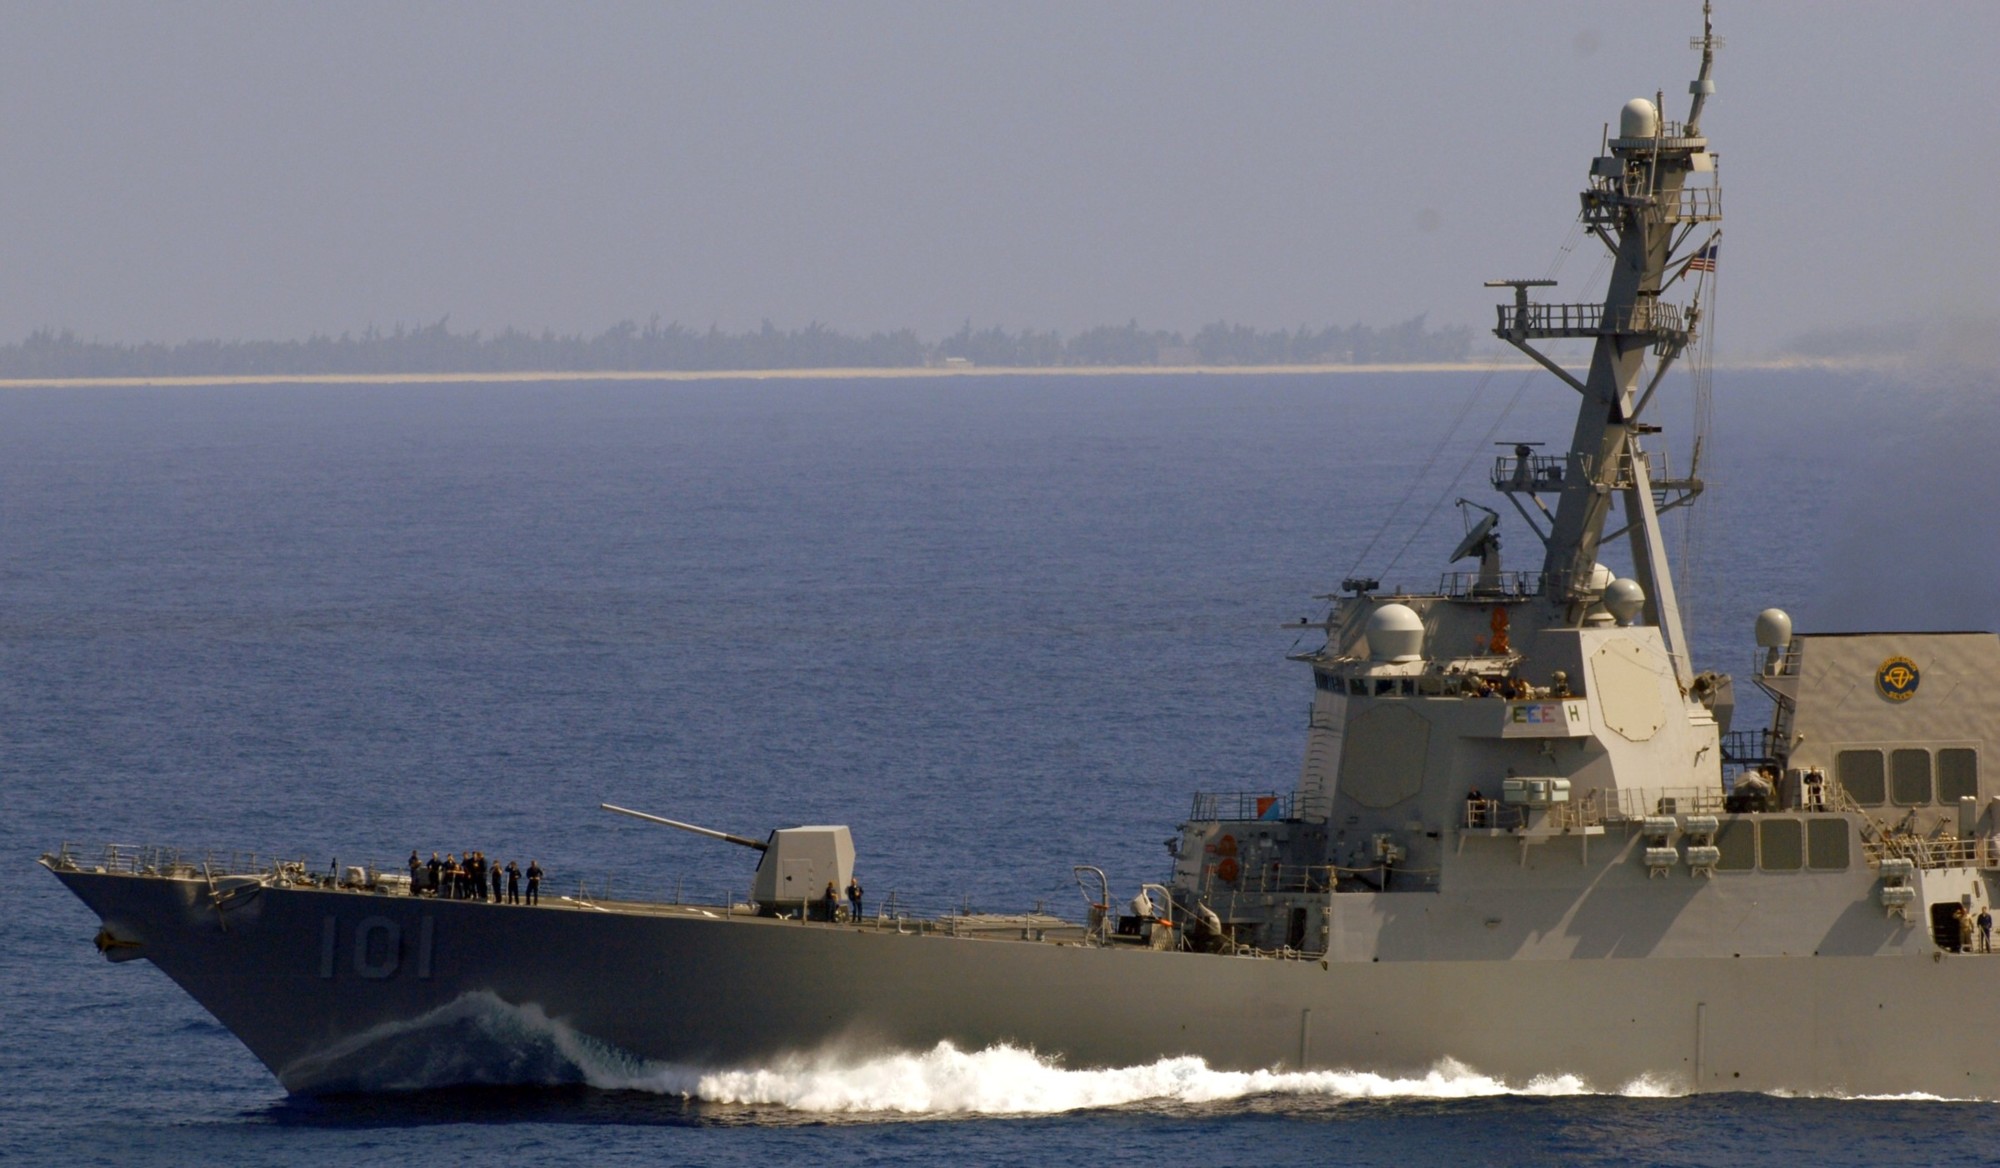 ddg-101 uss gridley arleigh burke class guided missile destroyer aegis us navy 40